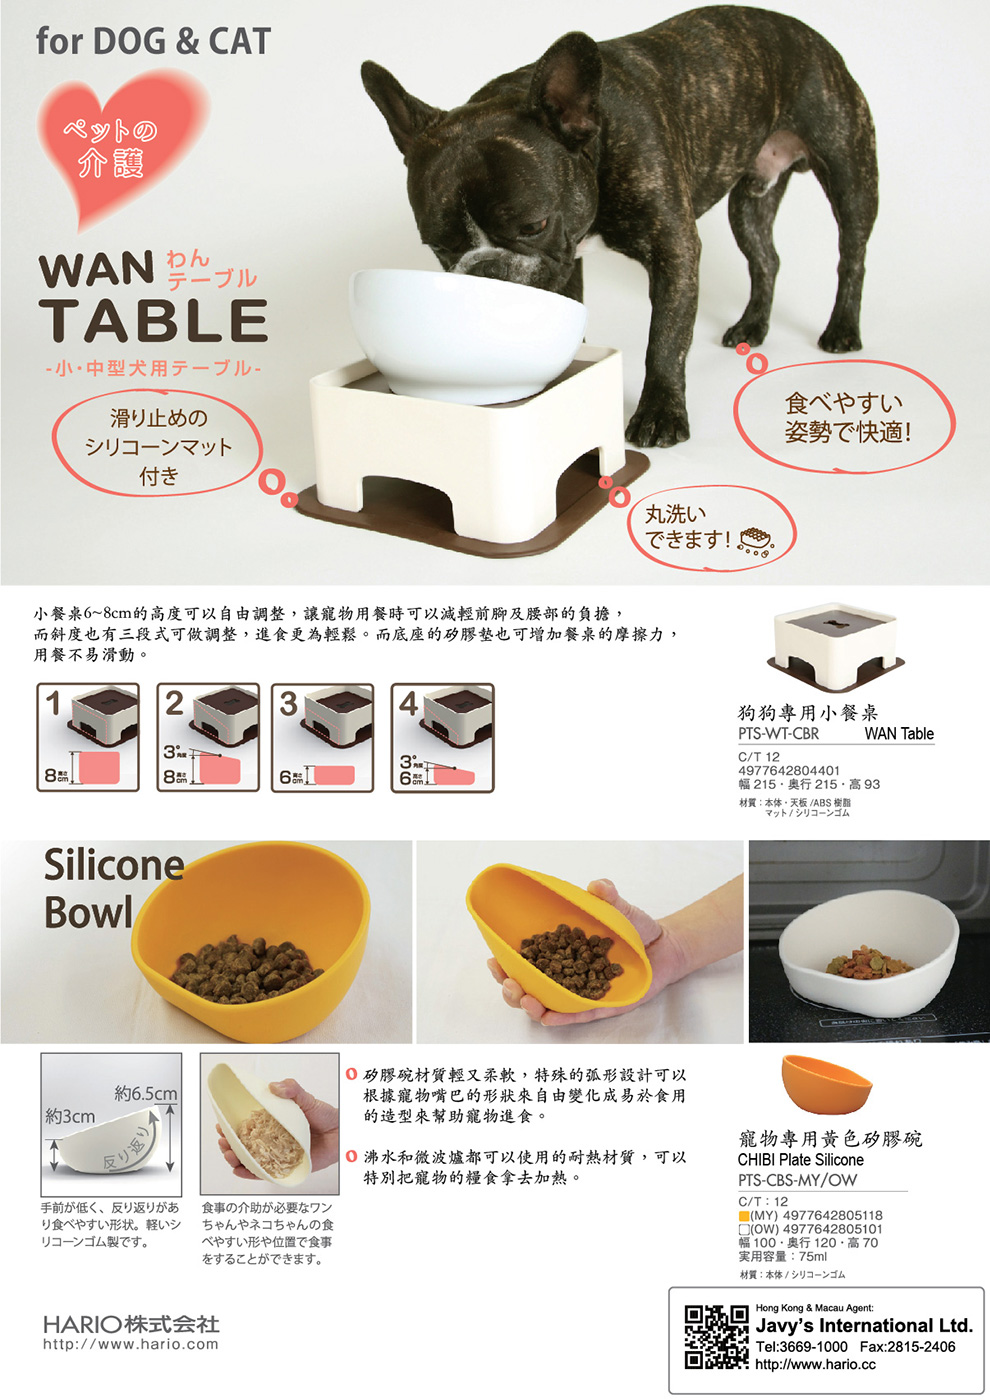 HARIO, Pet goods, Made in Japan, Dog, Cat, Wan Table, Silicone Bowl, PTS-WT-CBR, PTS-CBS-MY, PTS-CBS-OW